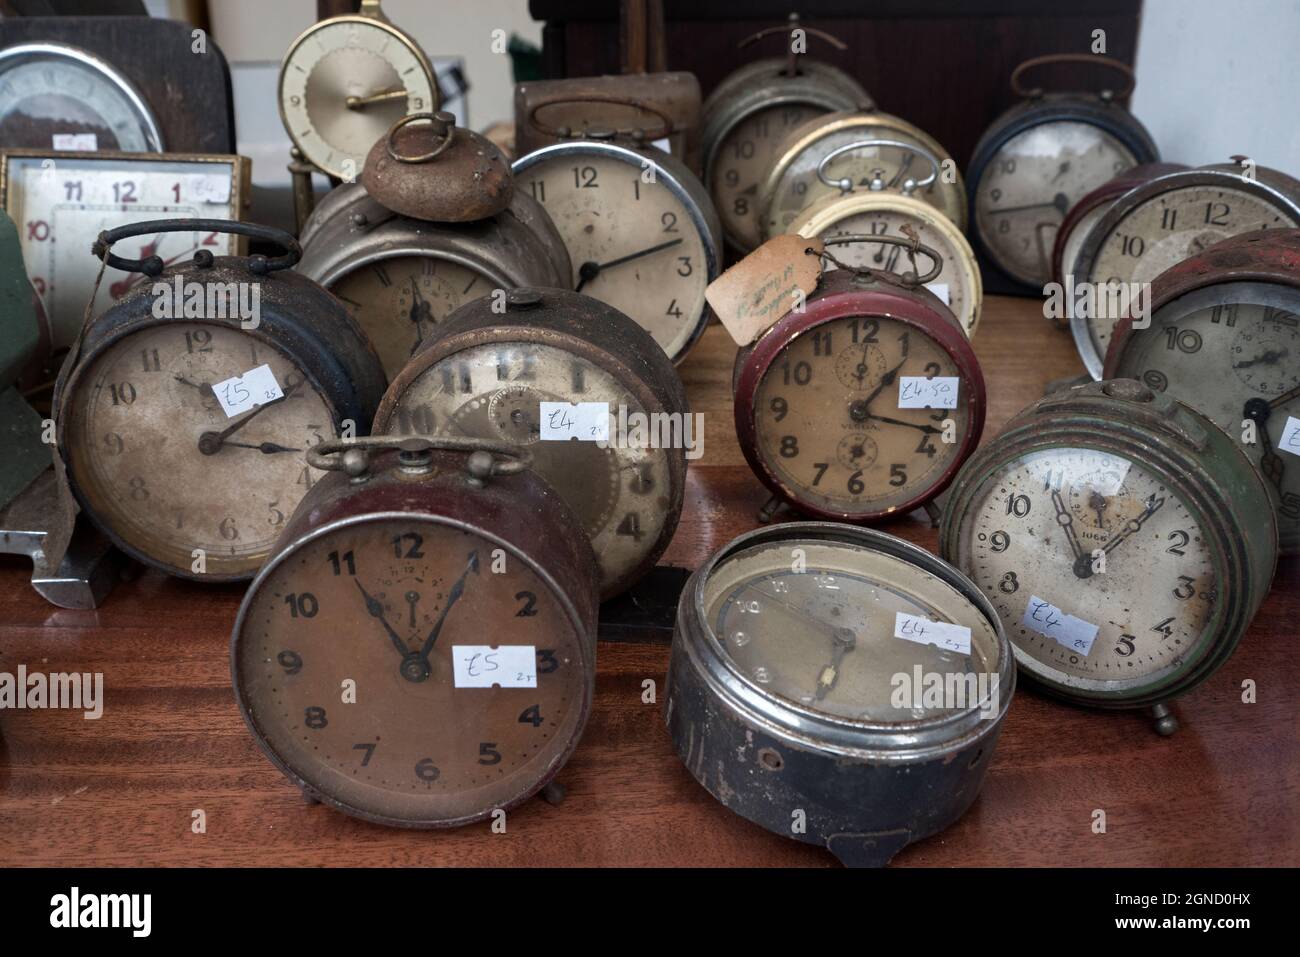 Old and dusty secondhand clocks for sale in a charity shop in Edinburgh, Scotland, UK. Stock Photo